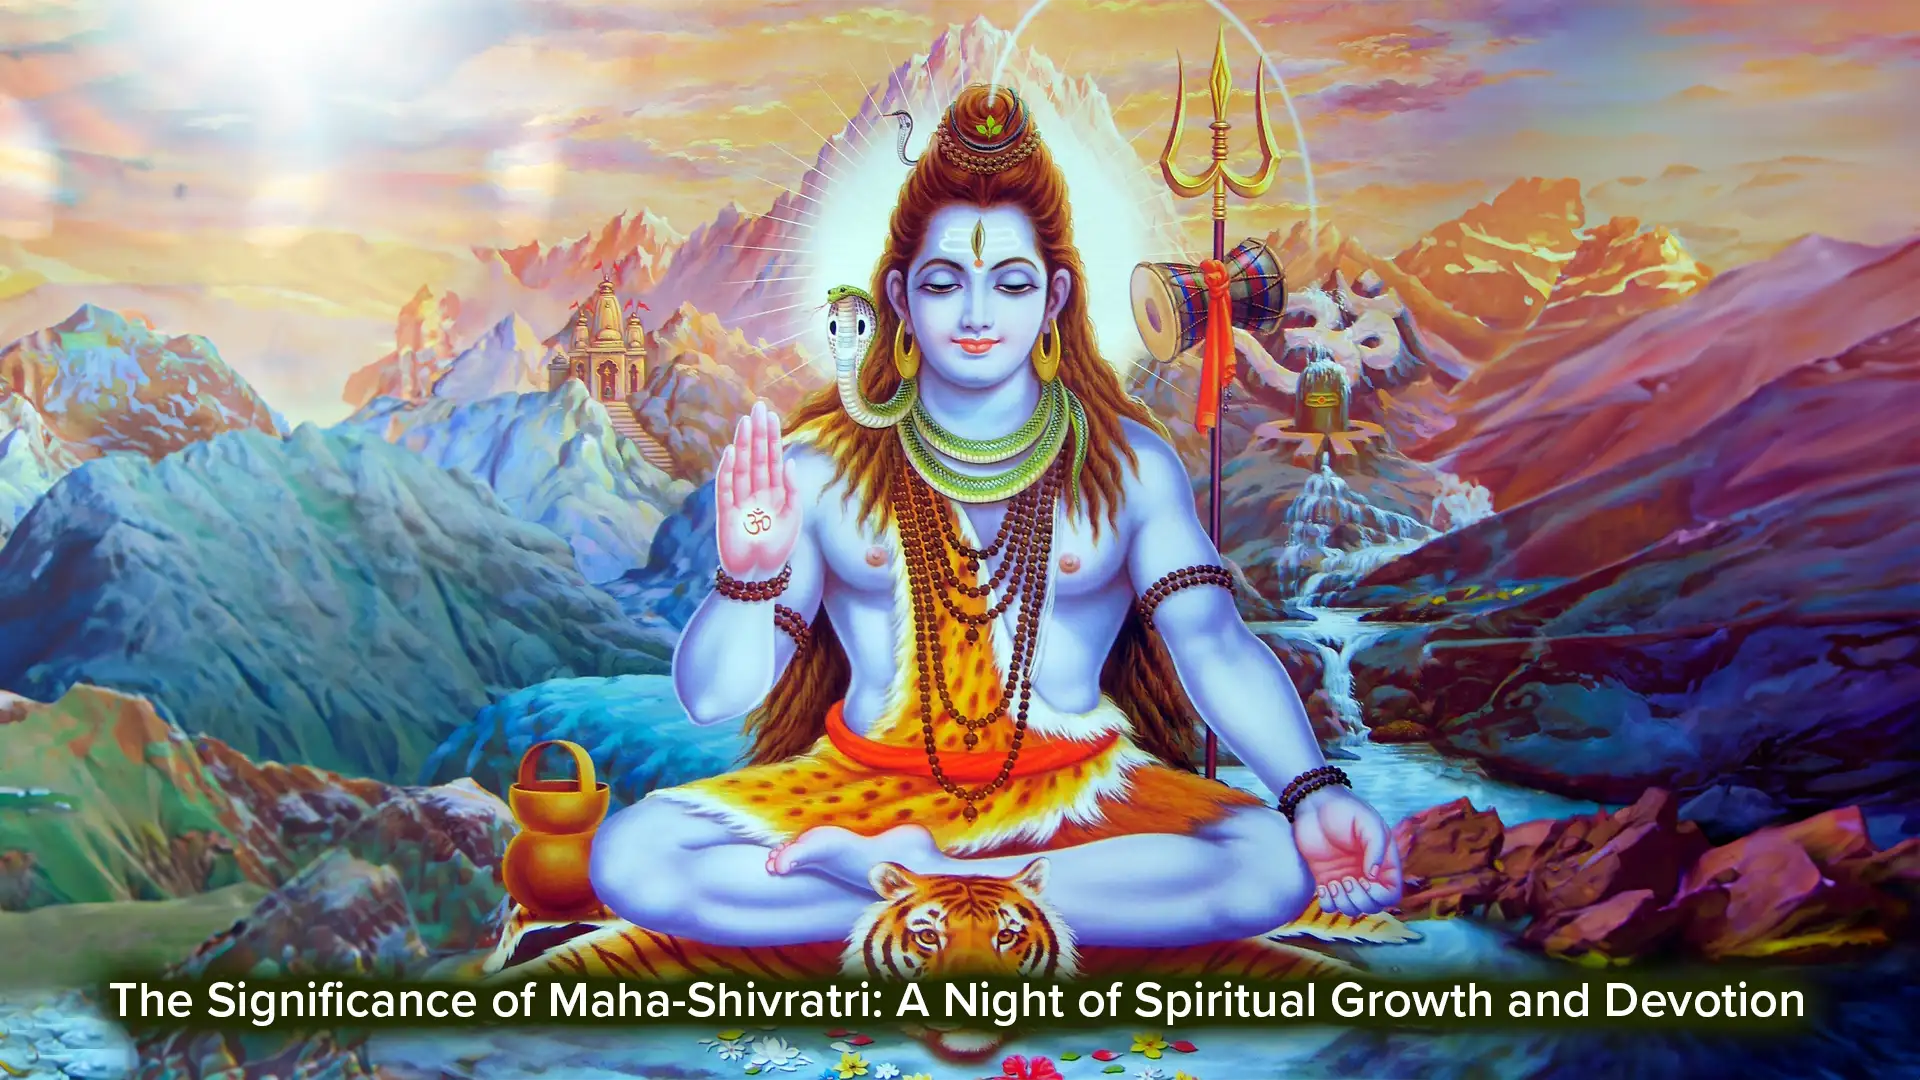 The Significance of Maha-Shivratri: A Night of Spiritual Growth and Devotion